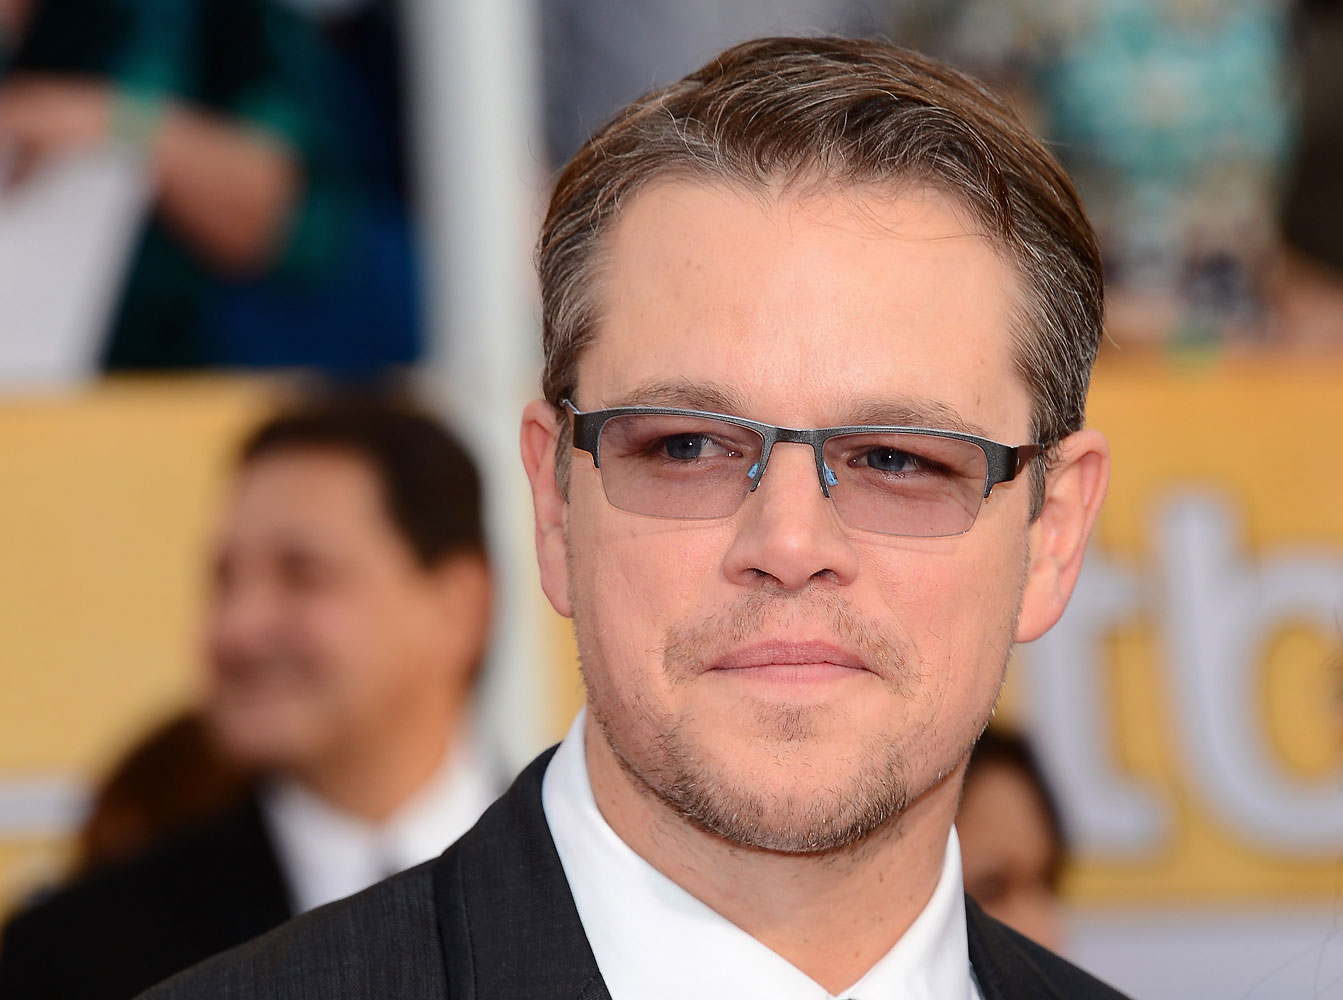 Actor Matt Damon attends the 20th Annual Screen Actors Guild Awards at The Shrine Auditorium on January 18, 2014 in Los Angeles, California.